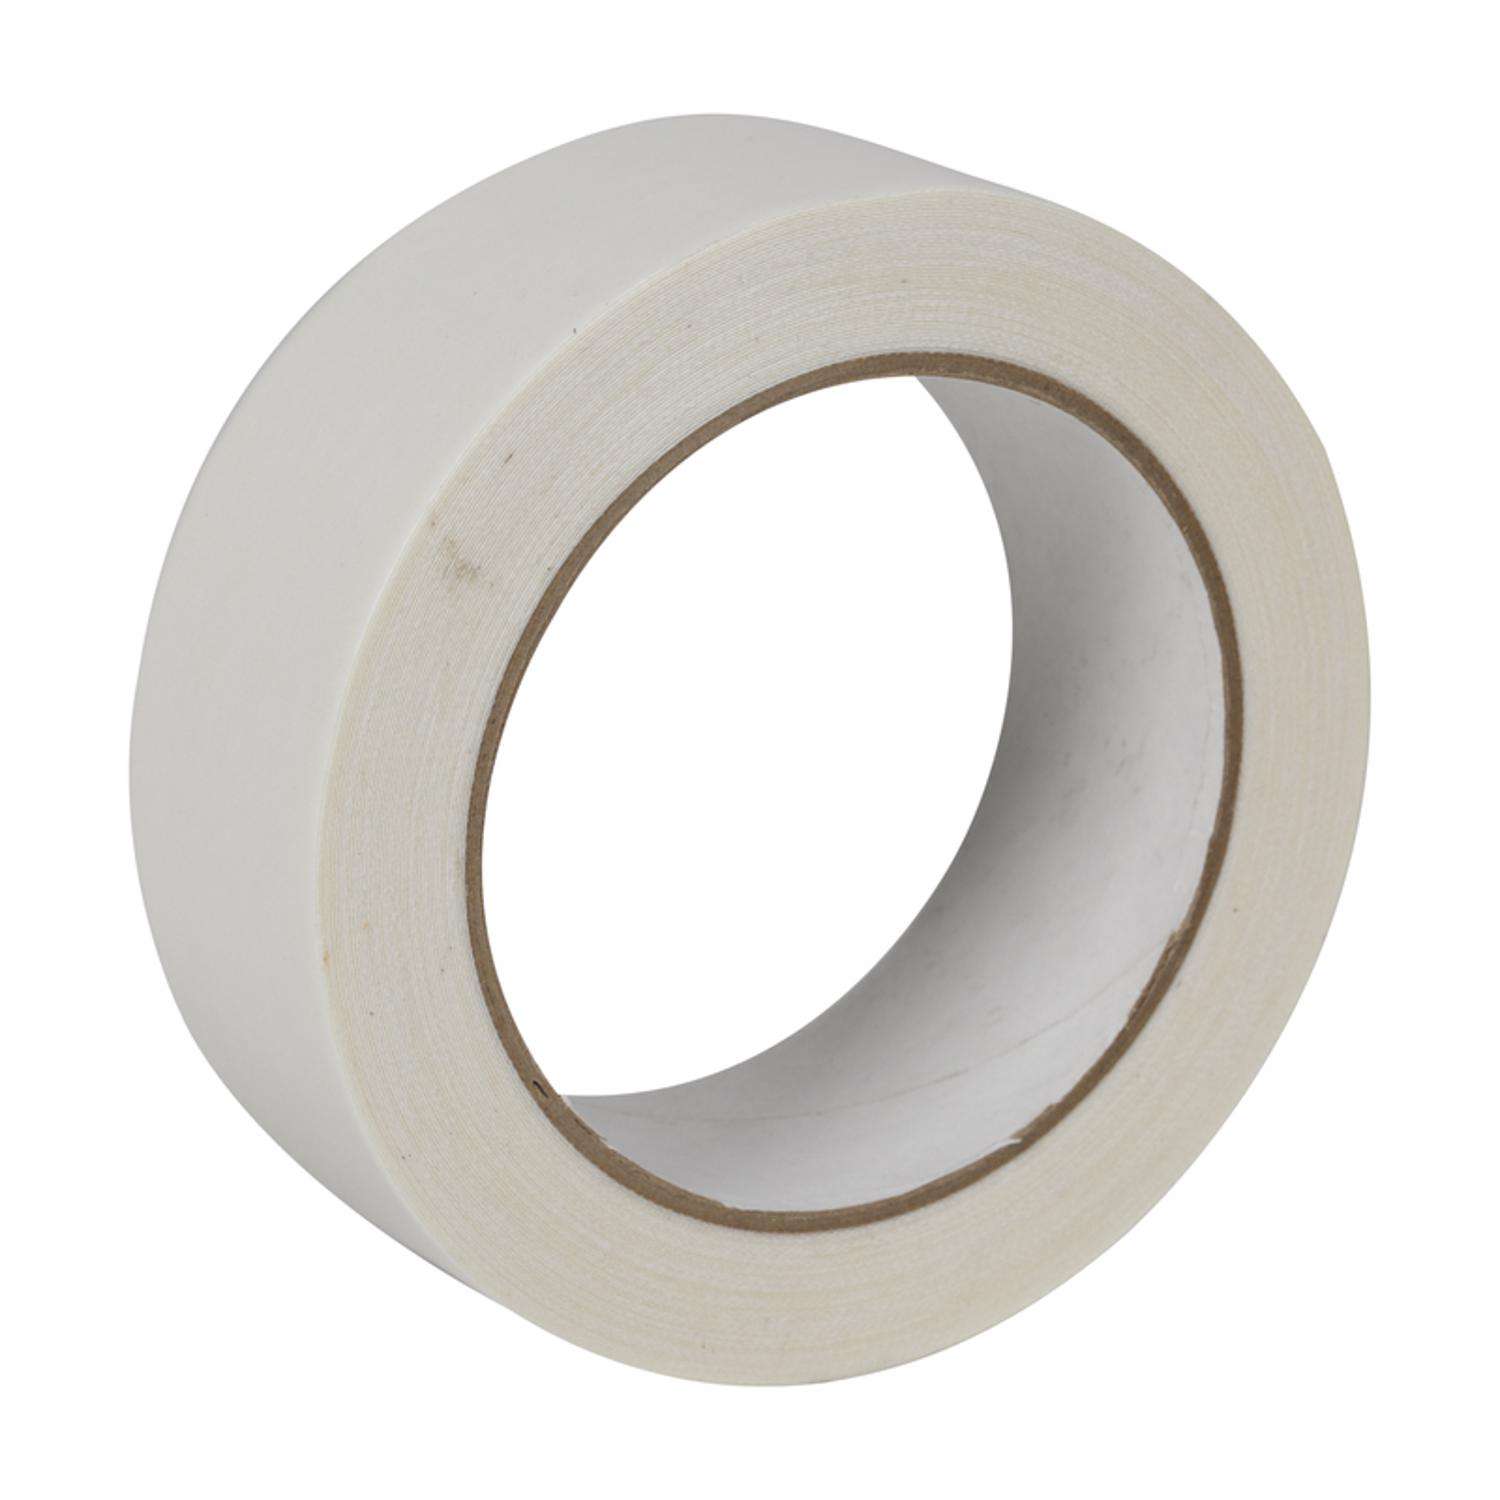 Double Sided Gaffer Tape - Carpet Tape: FREE S&H No Min Order